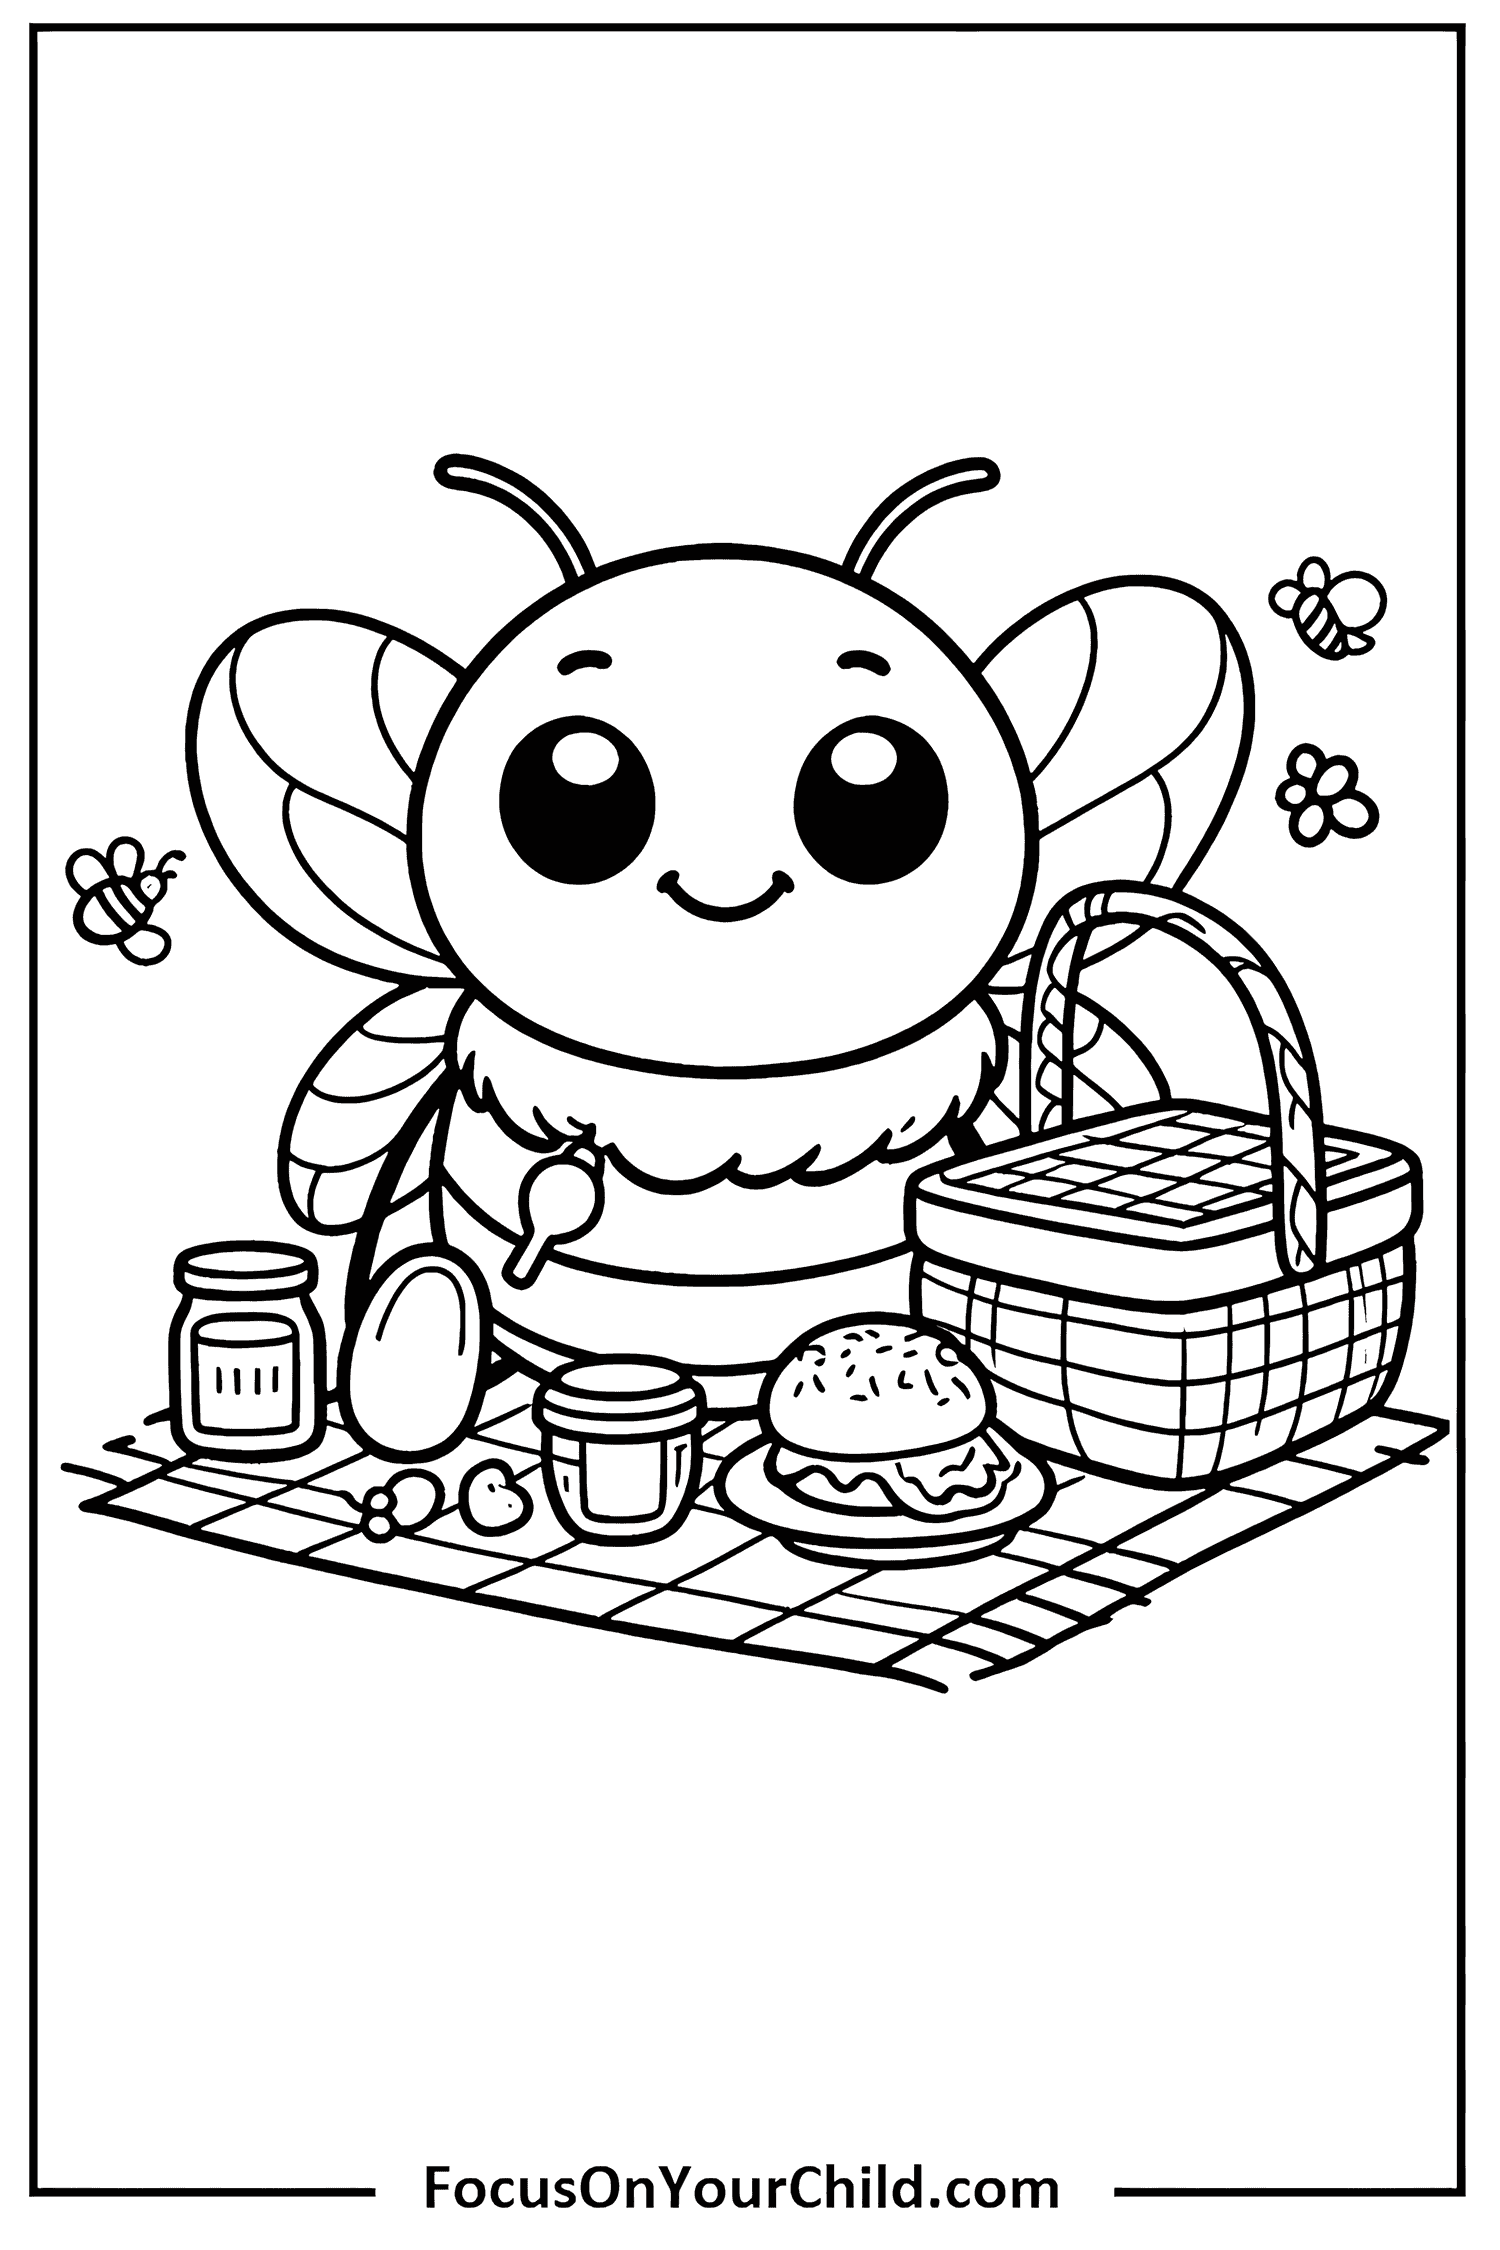 Cheerful bee enjoying a picnic with jars of honey, sandwich, and apples.